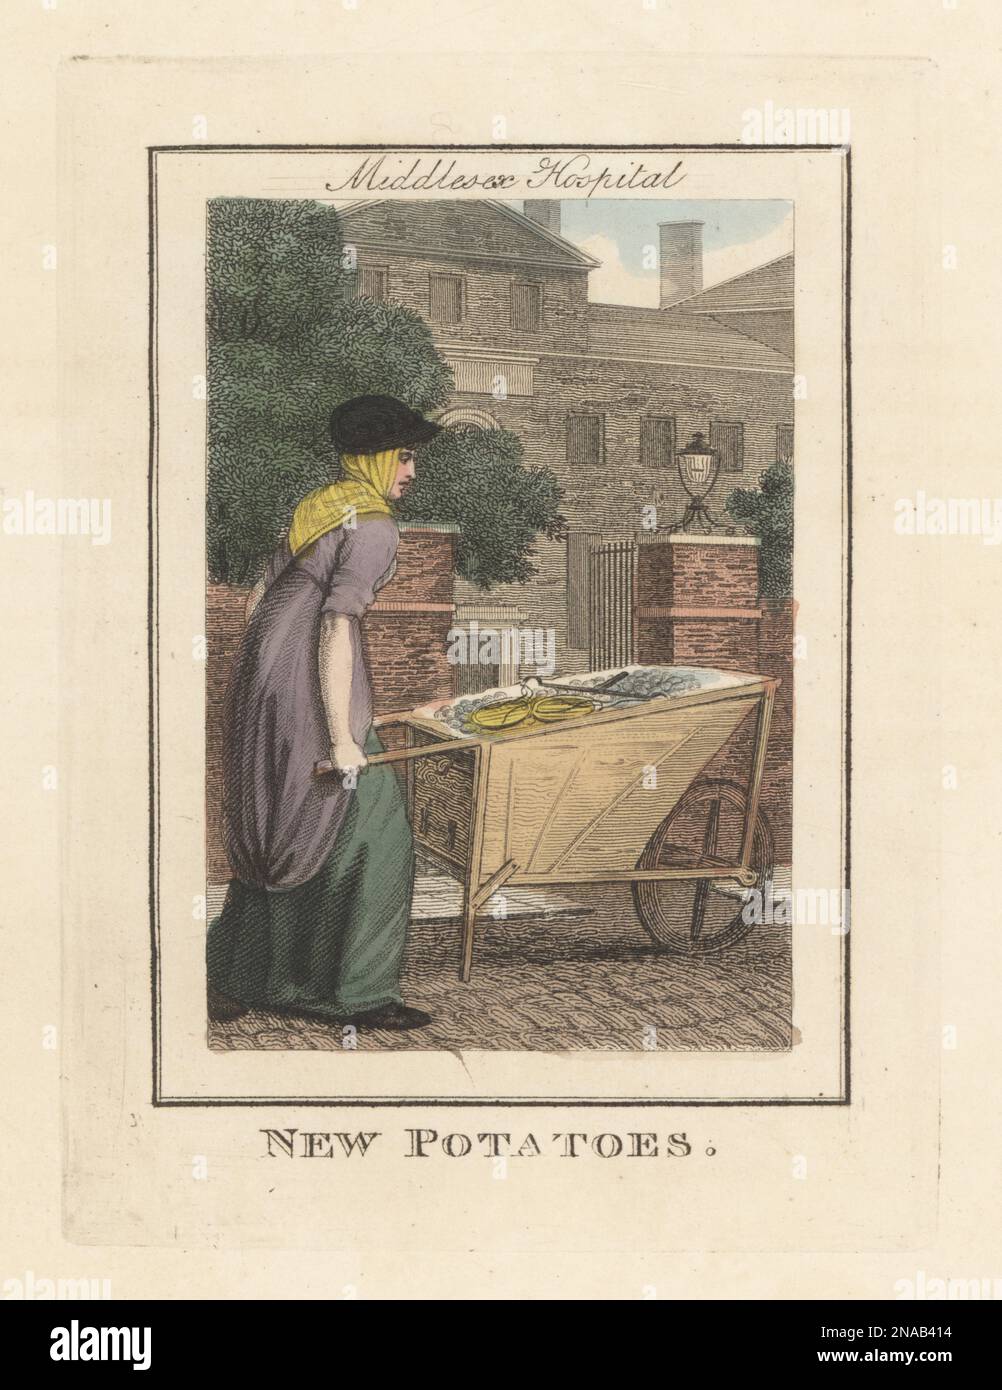 Woman selling new potatoes at Middlesex Hospital. In bonnet, fichu, dress and petticoats with wheelbarrow of potatoes. Gate and gardens of Middlesex Hospital, built in 1755 and demolished in 2017. Handcoloured copperplate engraving by Edward Edwards after an illustration by William Marshall Craig from Description of the Plates Representing the Itinerant Traders of London, Richard Phillips, No. 71 St Paul’s Churchyard, London, 1805. Stock Photo